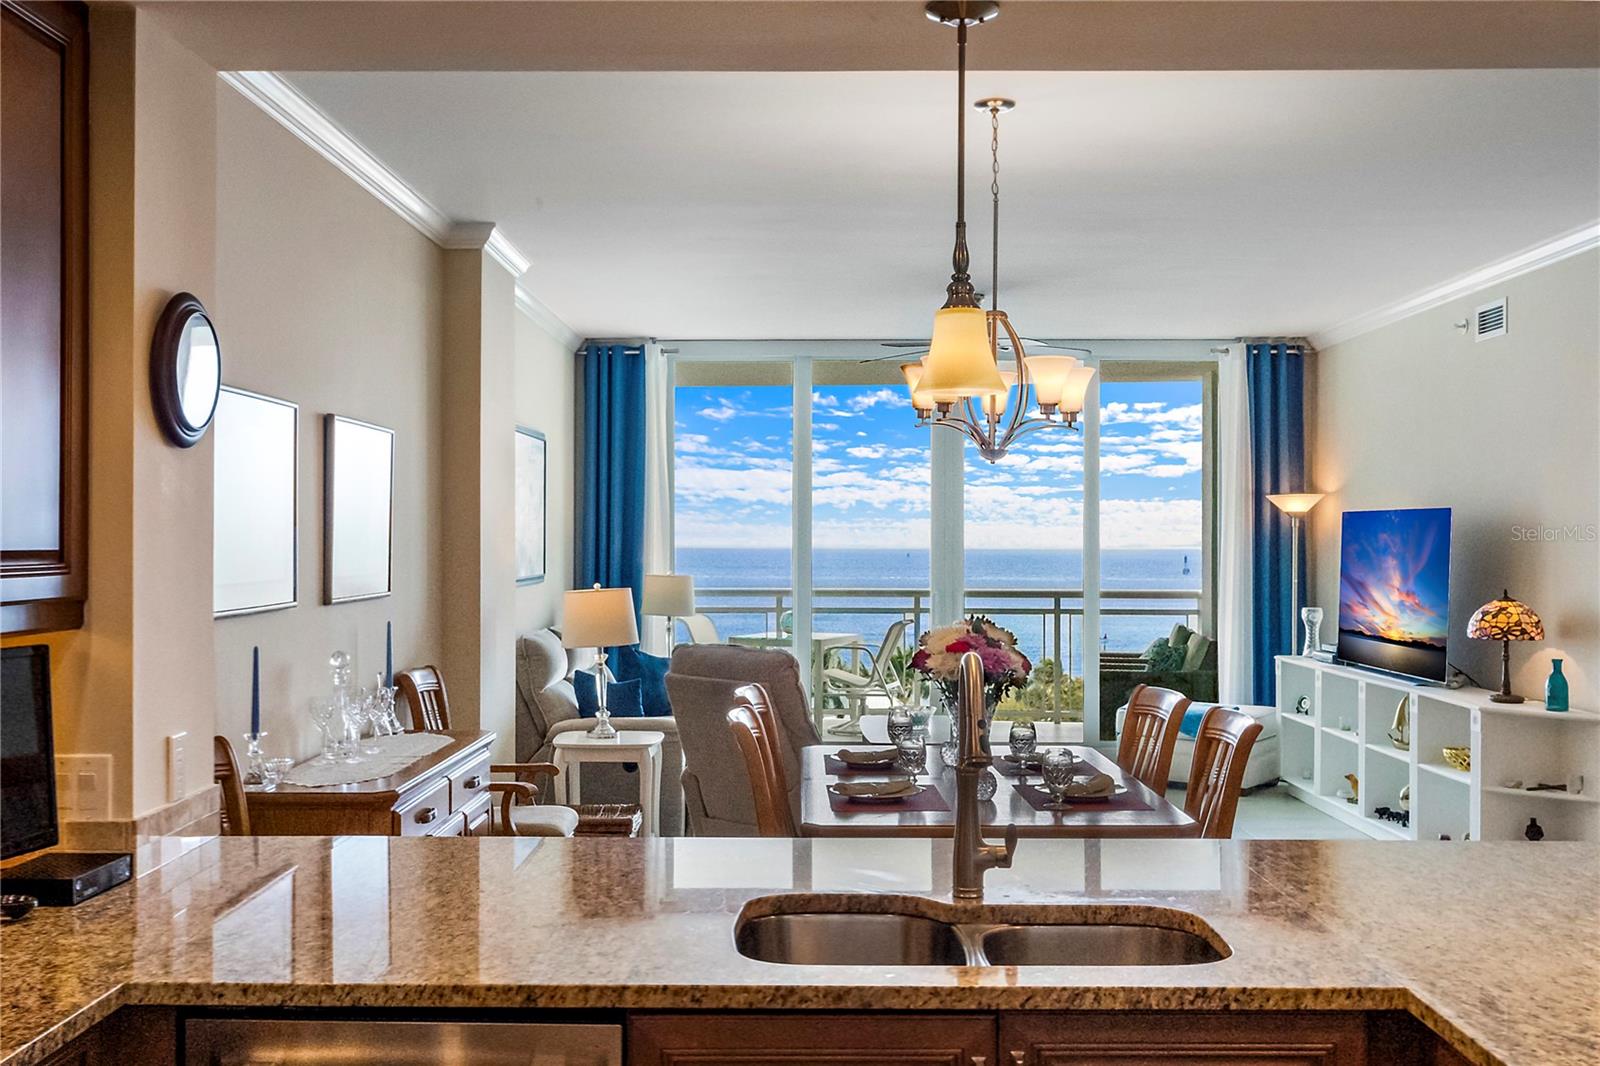 Open concept floor plan with abundant natural lighting to enjoy the spectacular water views of Tampa Bay